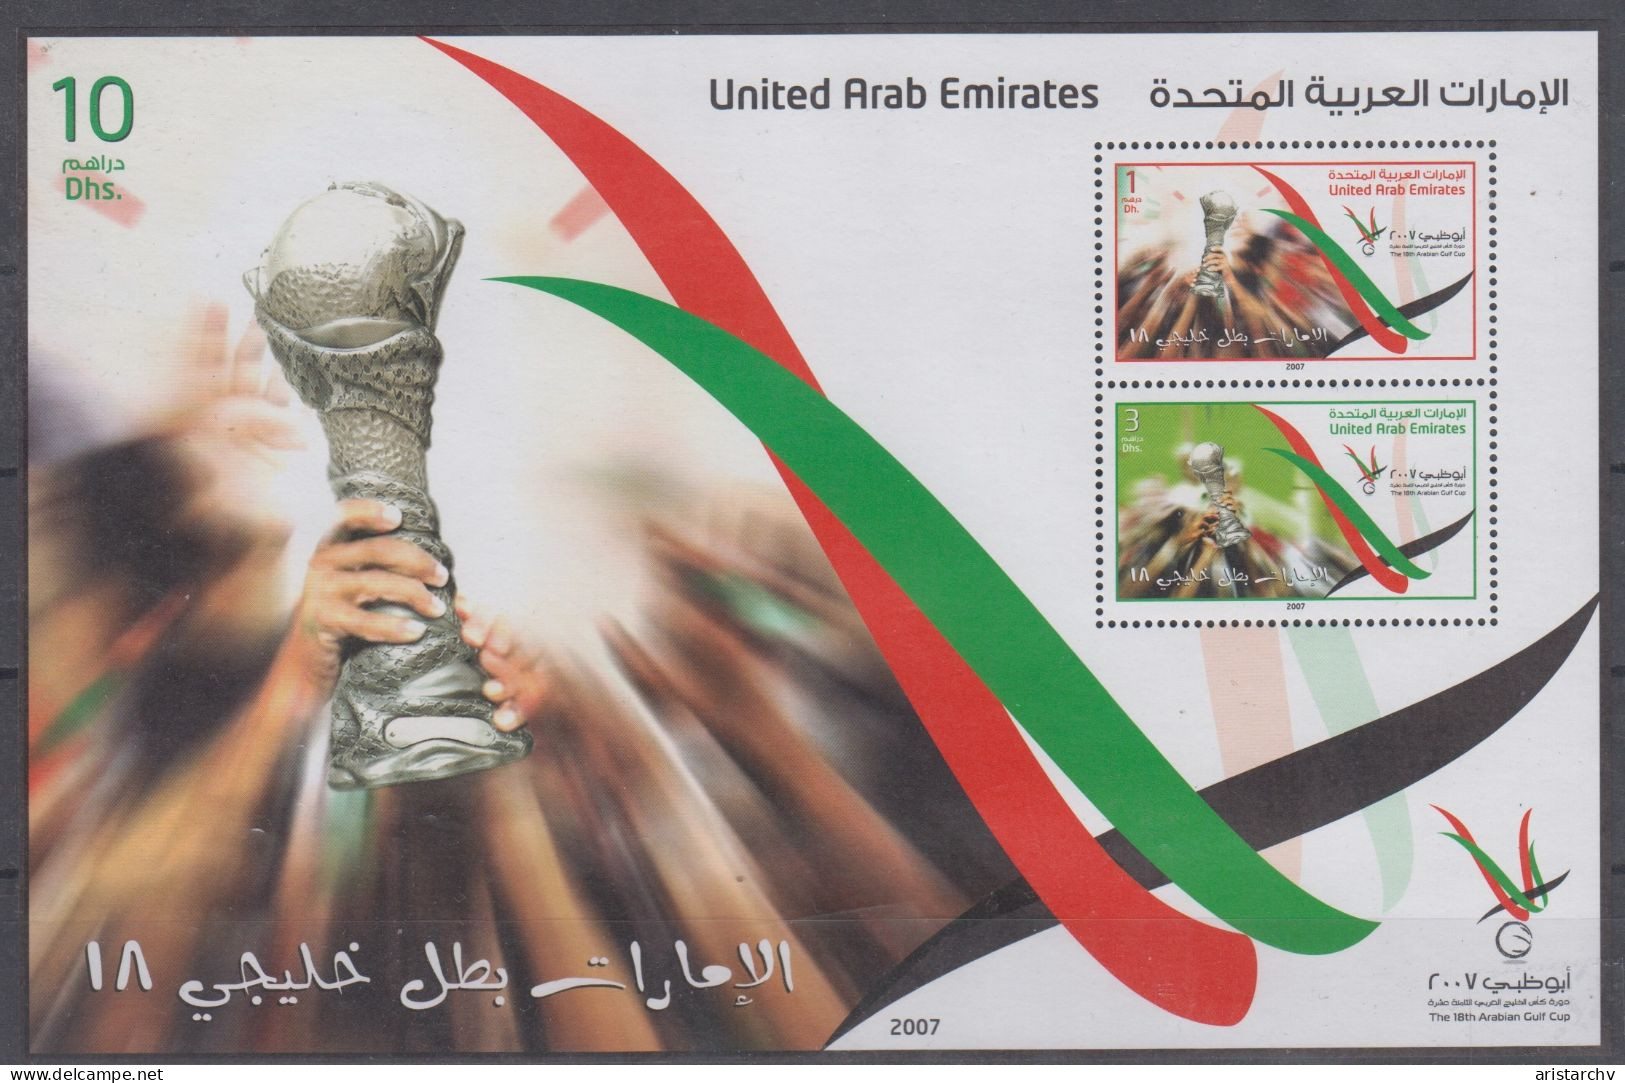 UAE 2007 FOOTBALL ARABIAN GULF CUP S/SHEET AND 2 STAMPS - Fußball-Asienmeisterschaft (AFC)